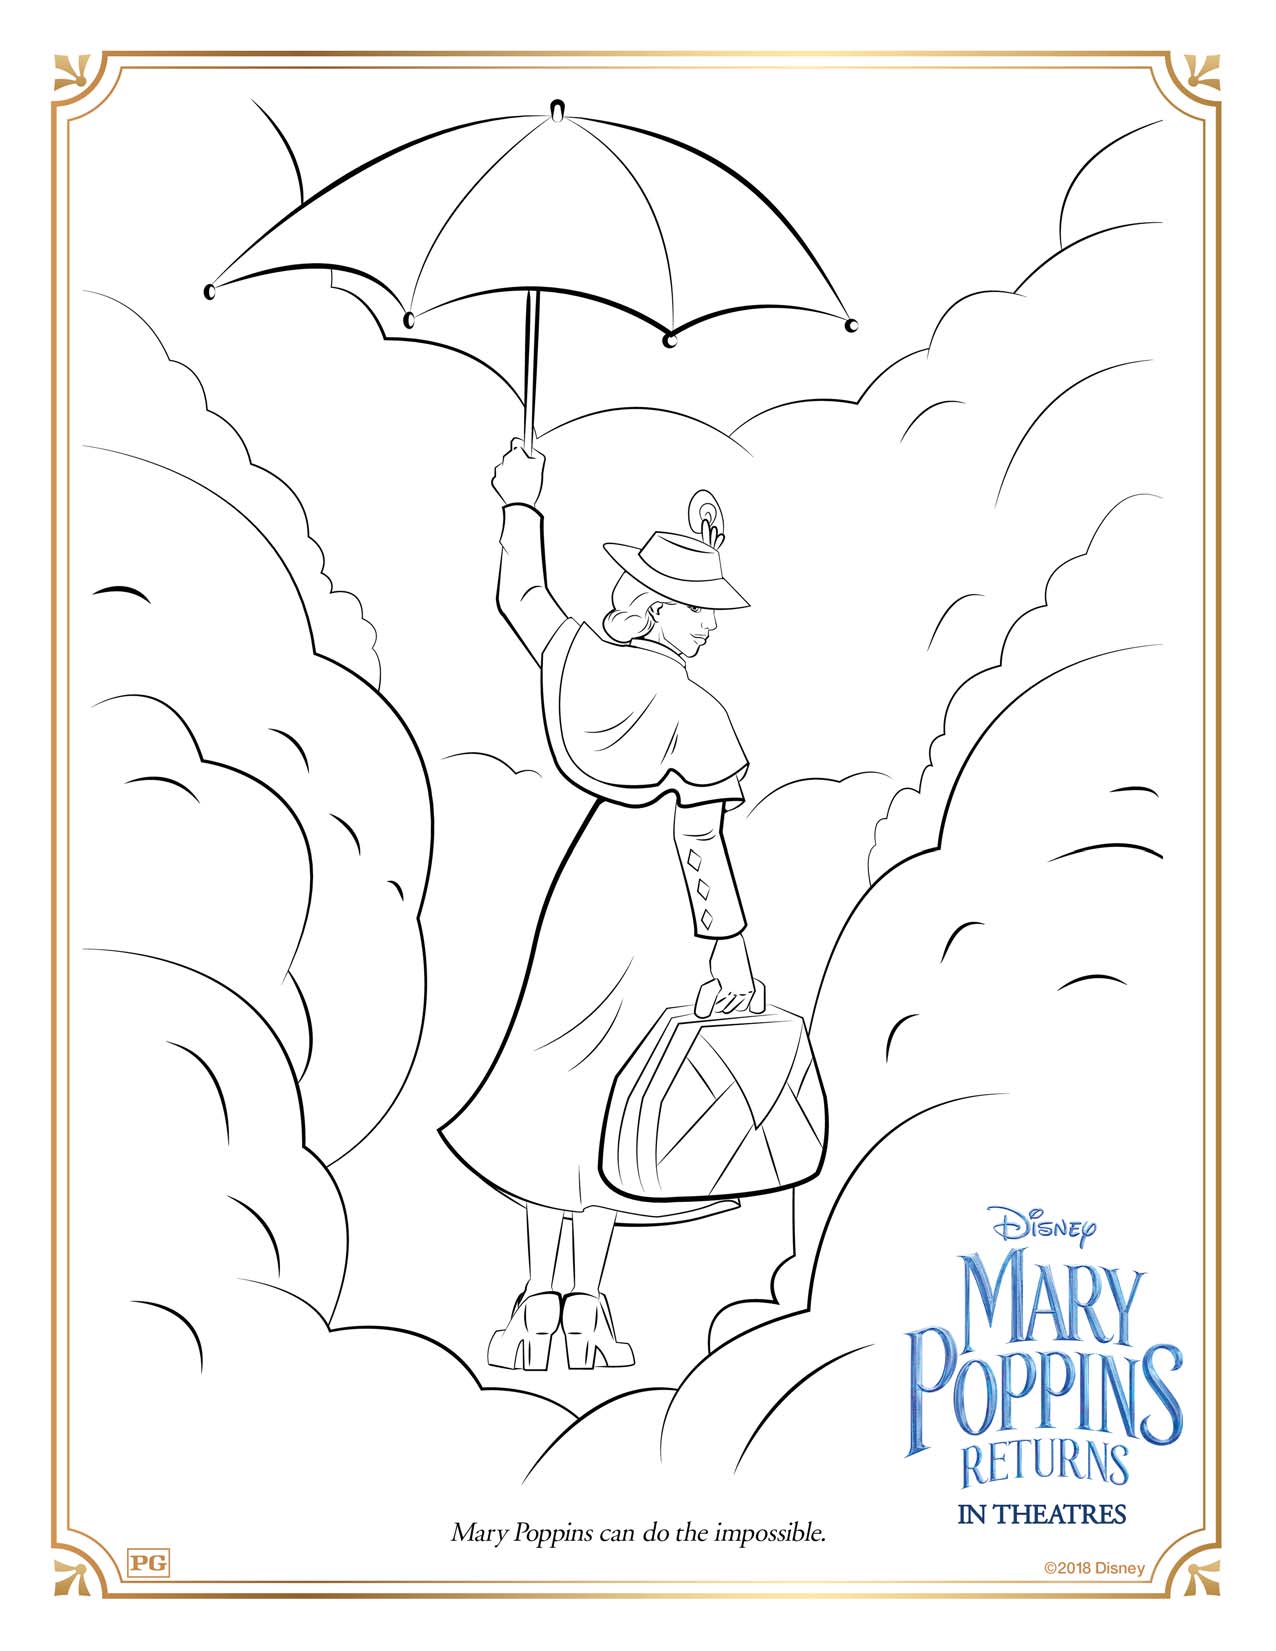 Mary Poppins Returns Coloring Page and Activity Sheets